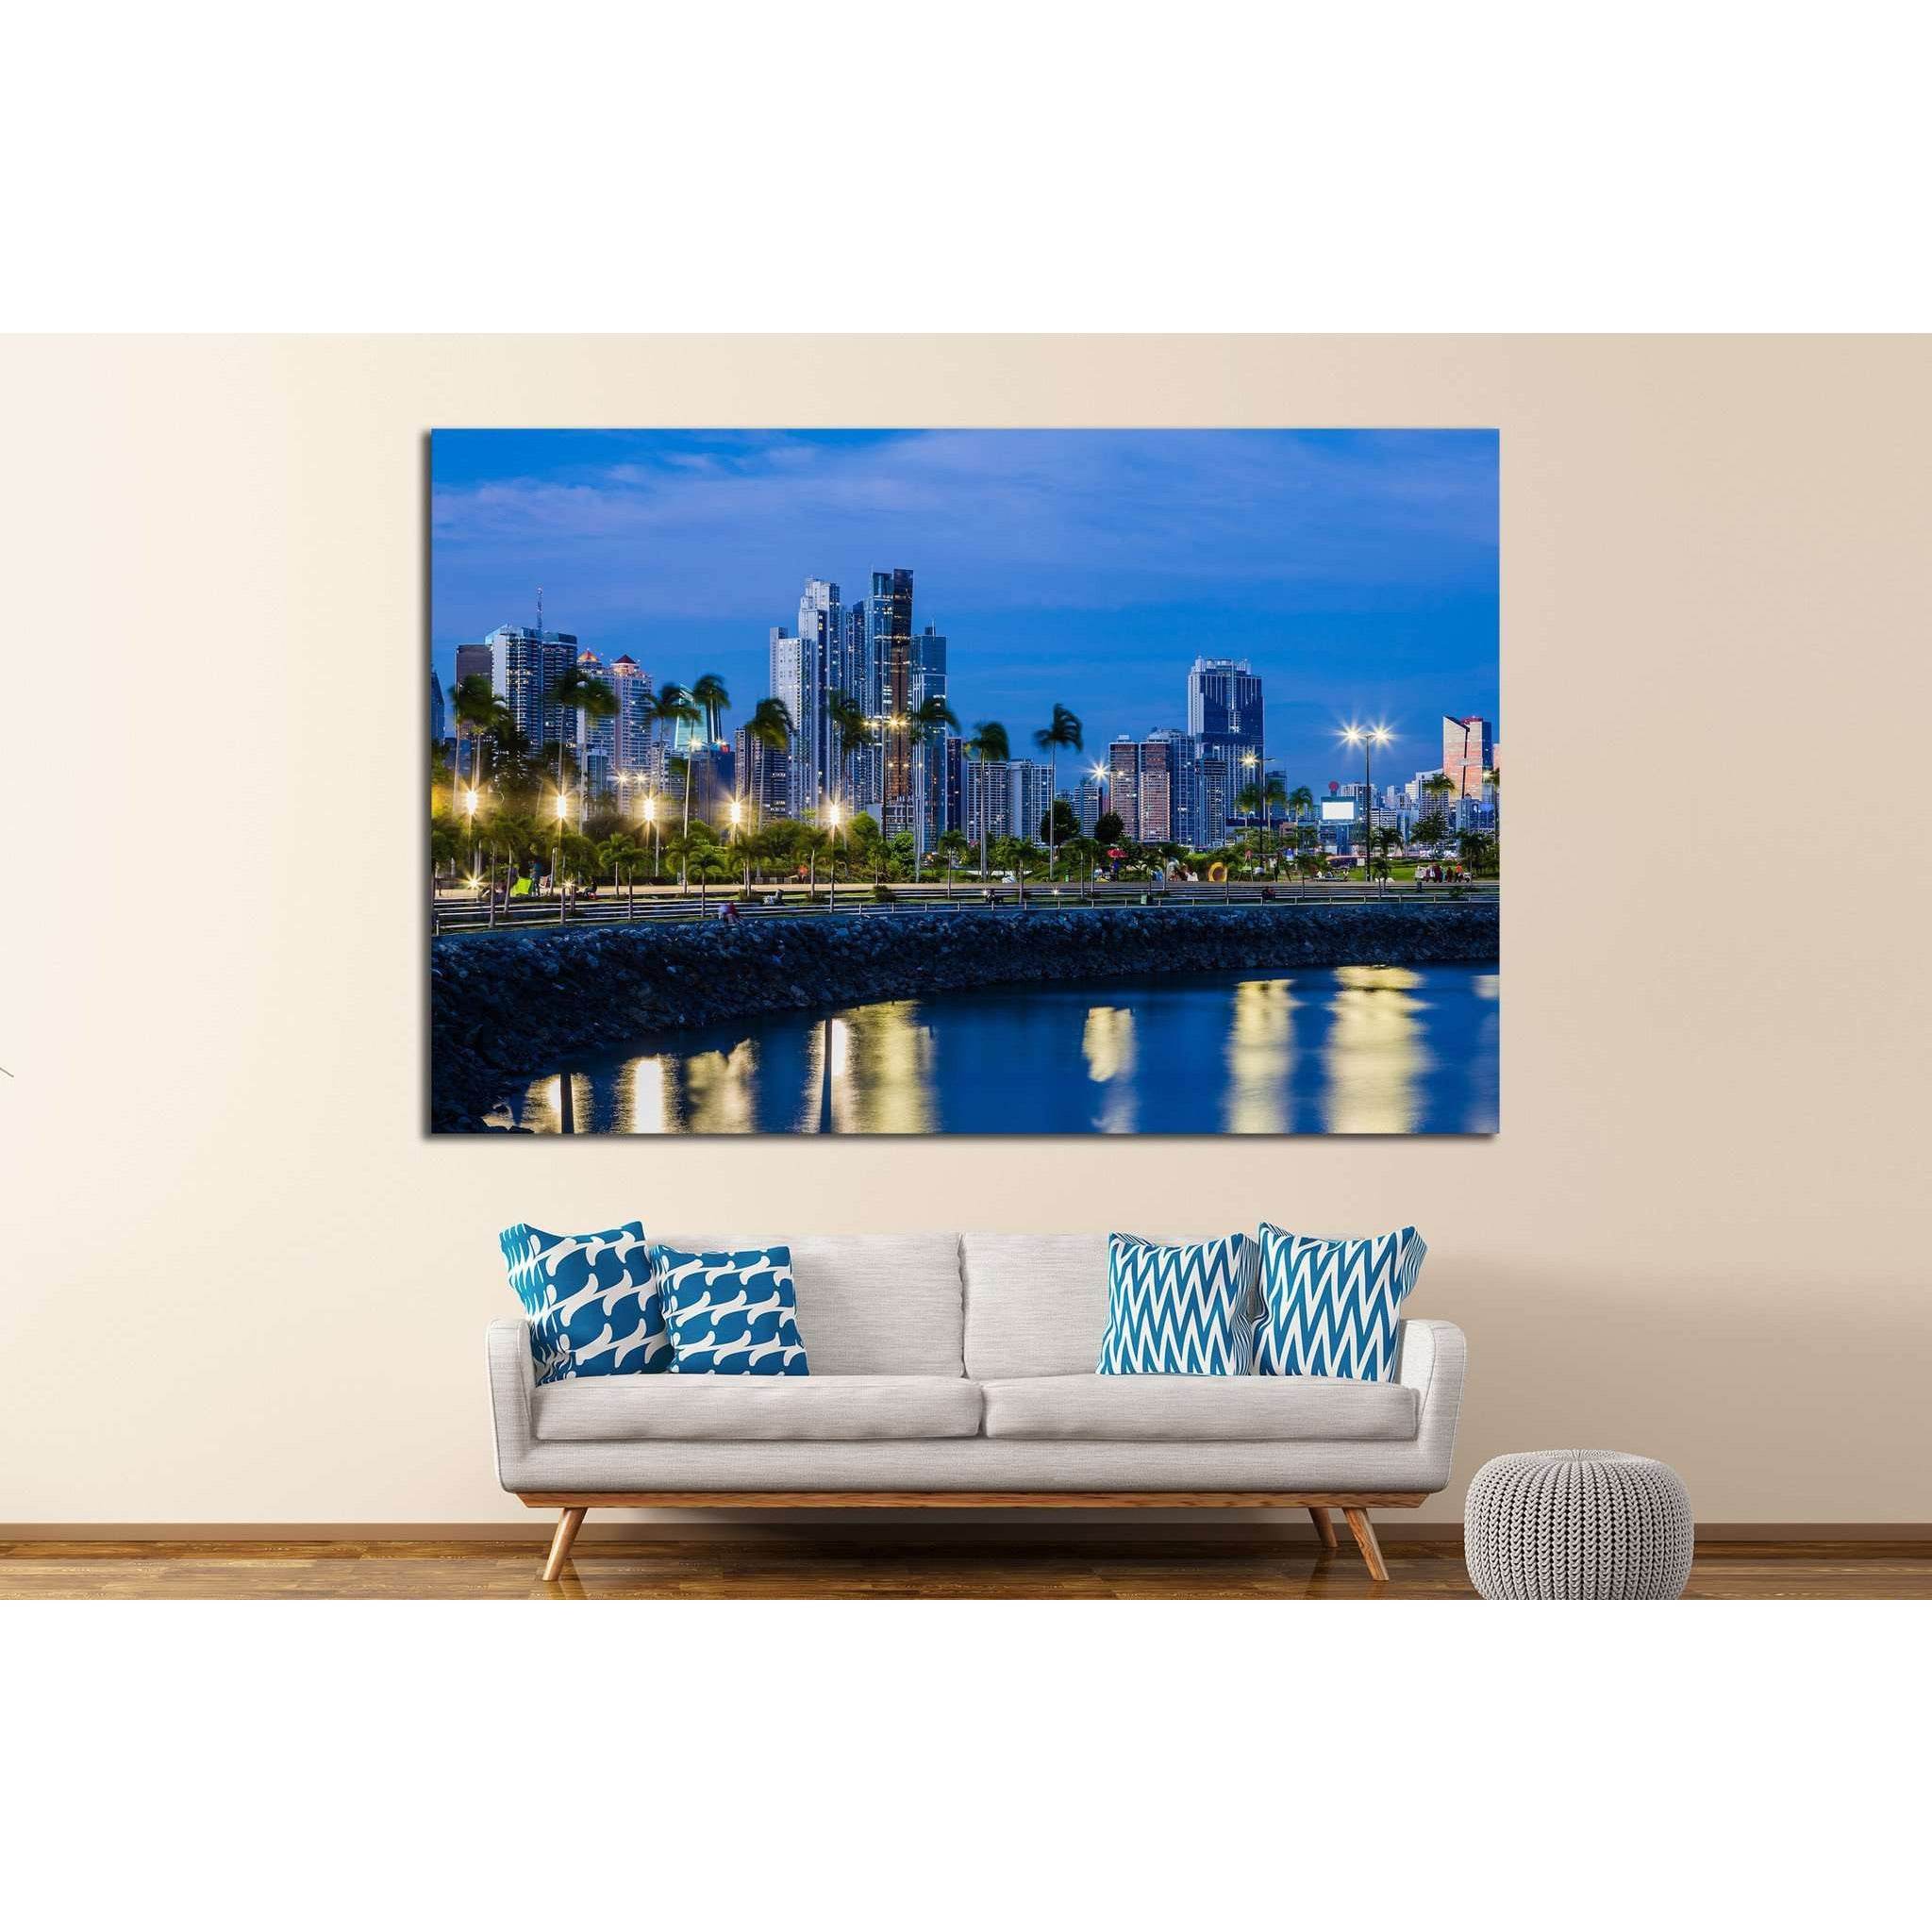 Skyline of Panama City at blue hour №1559 Ready to Hang Canvas Print